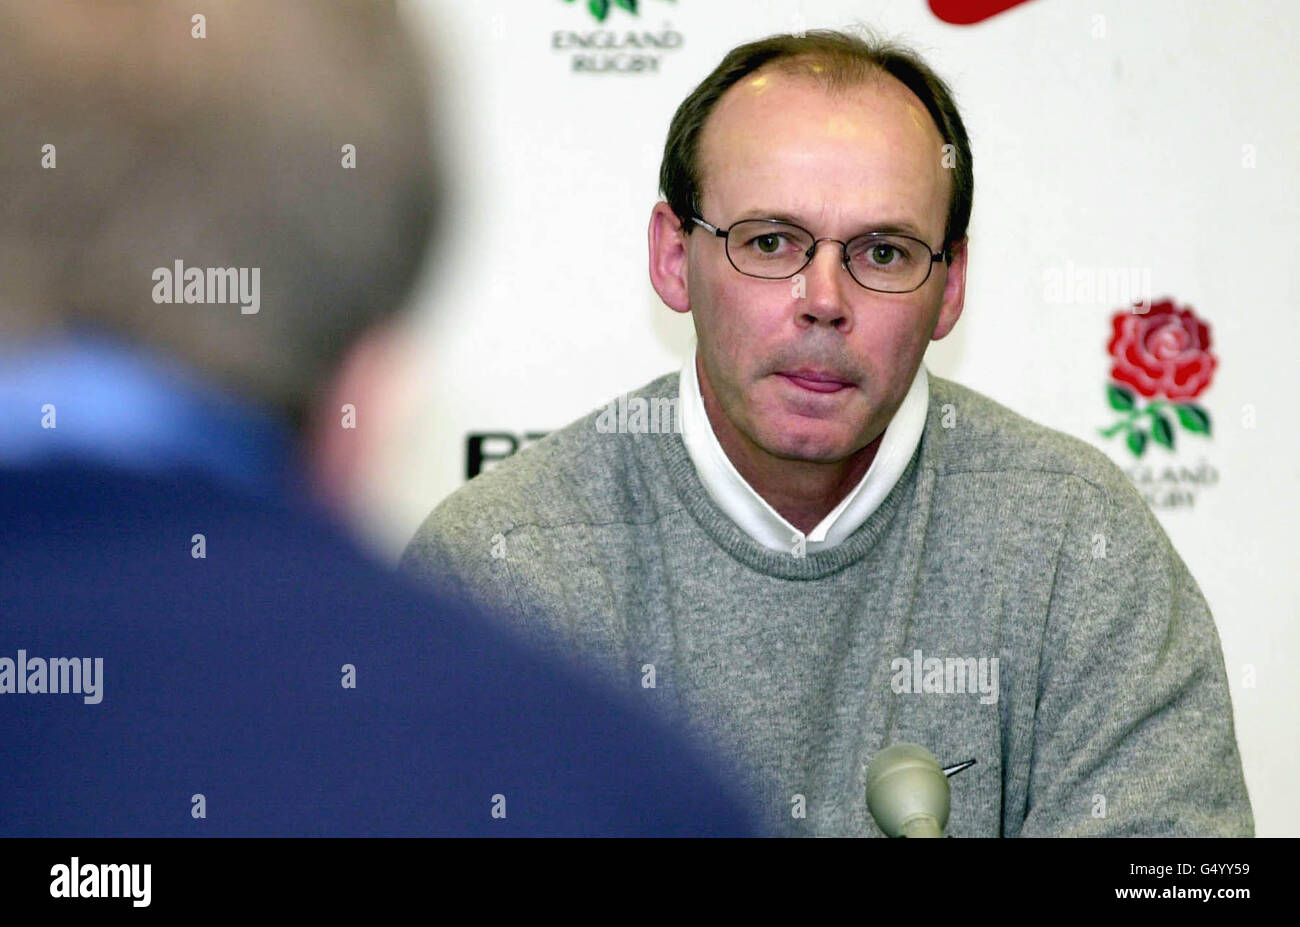 England rugby coach Clive Woodward answers questions from journalists during a press conference at the Marriott Dalmahoy hotel, near Edinburgh, in advance of their Six Nations Rugby Championship match against Scotland. Stock Photo